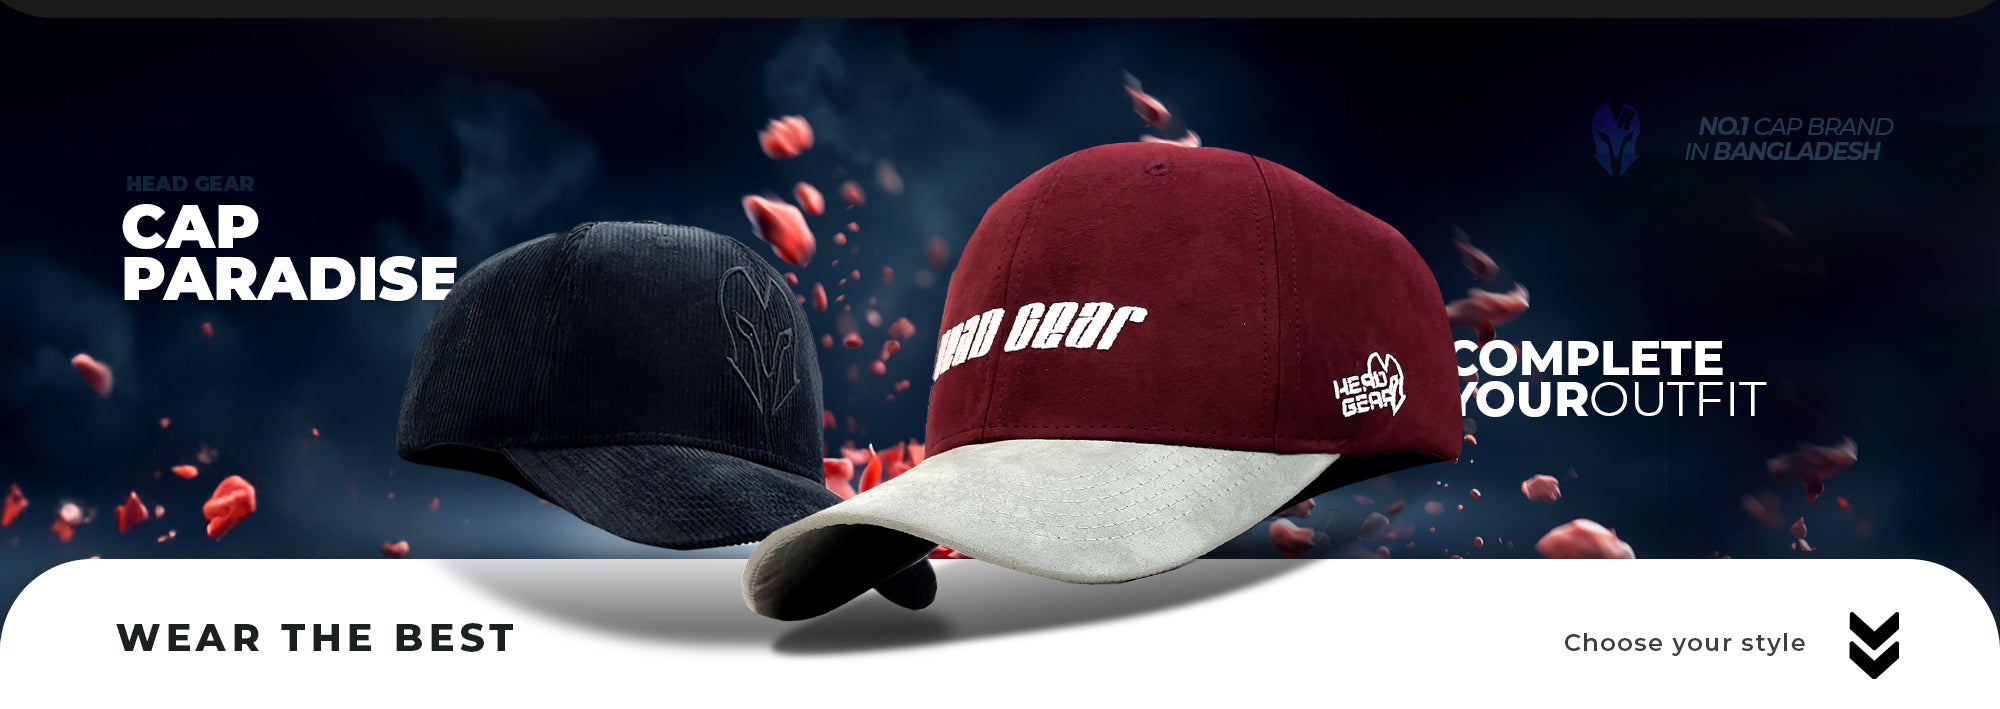 Hats and Caps for Men, Women are Available Online. – Head Gear